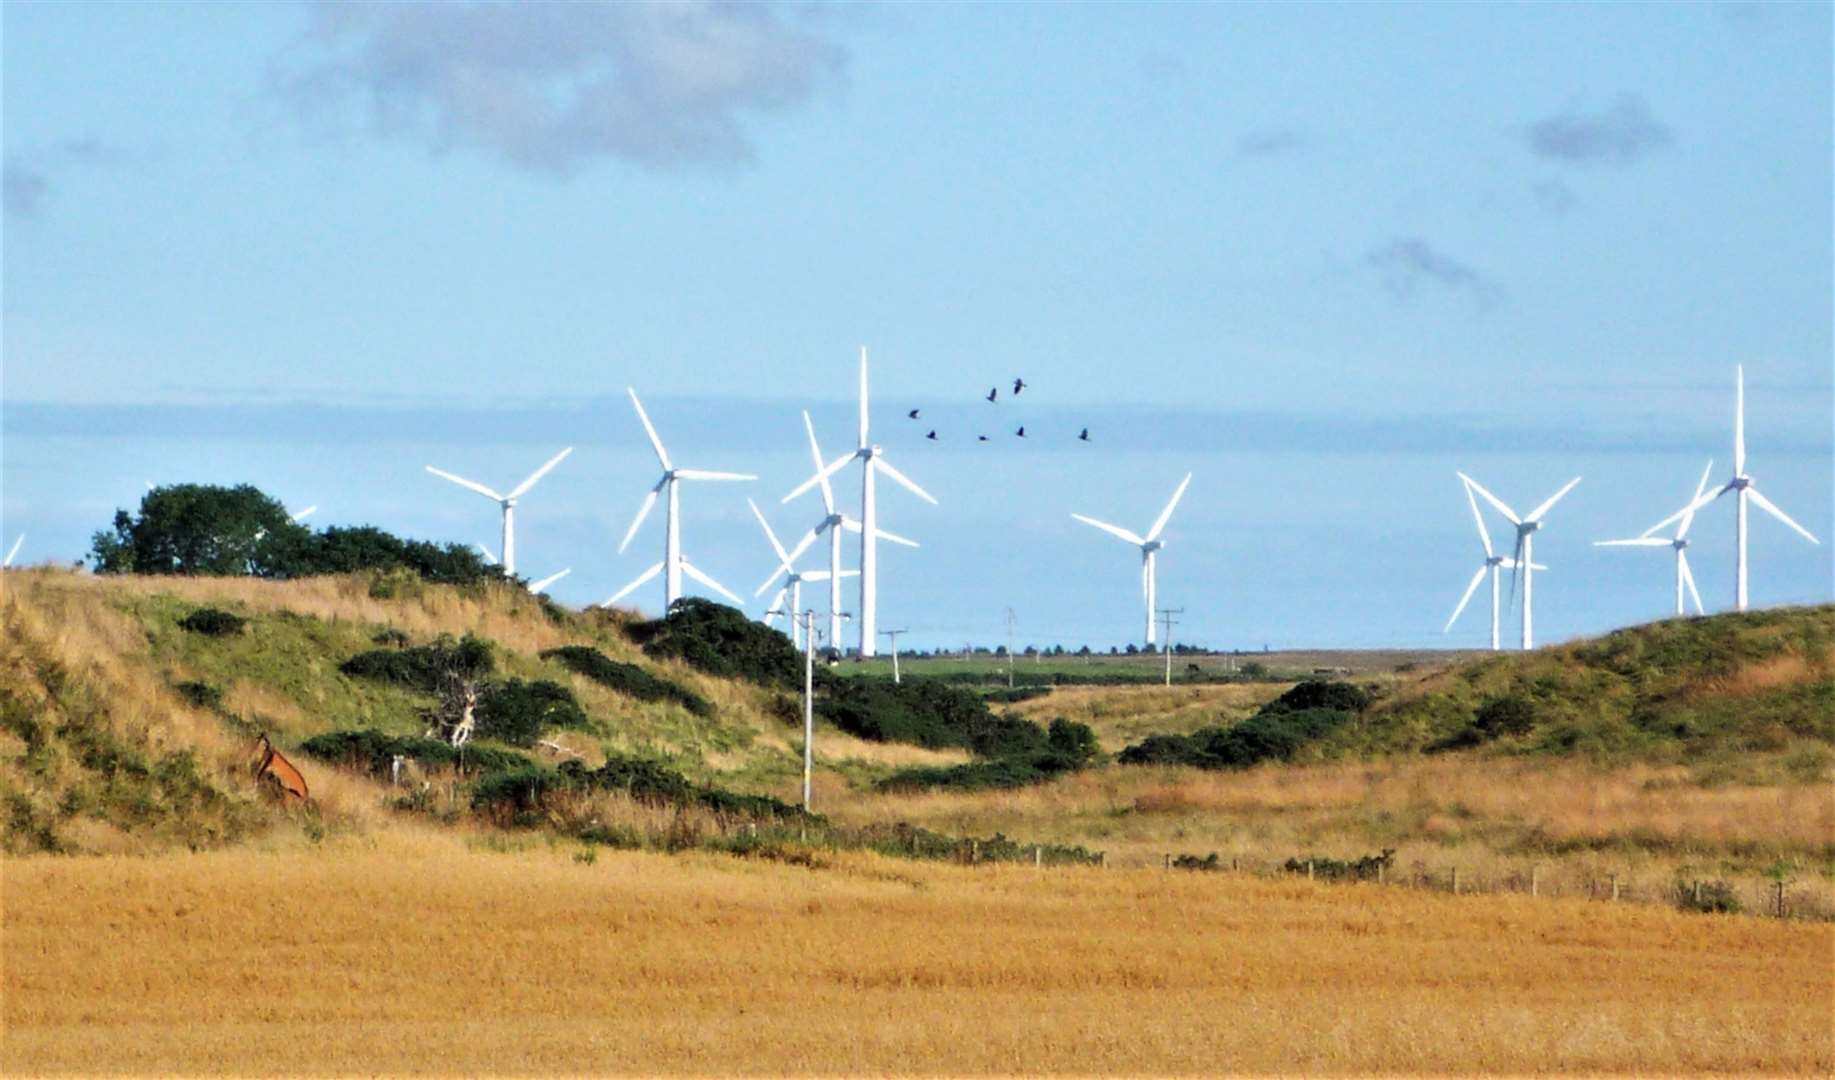 The area around Watten has a series of wind farms and they could now be in place for longer than originally anticipated. Picture: DGS